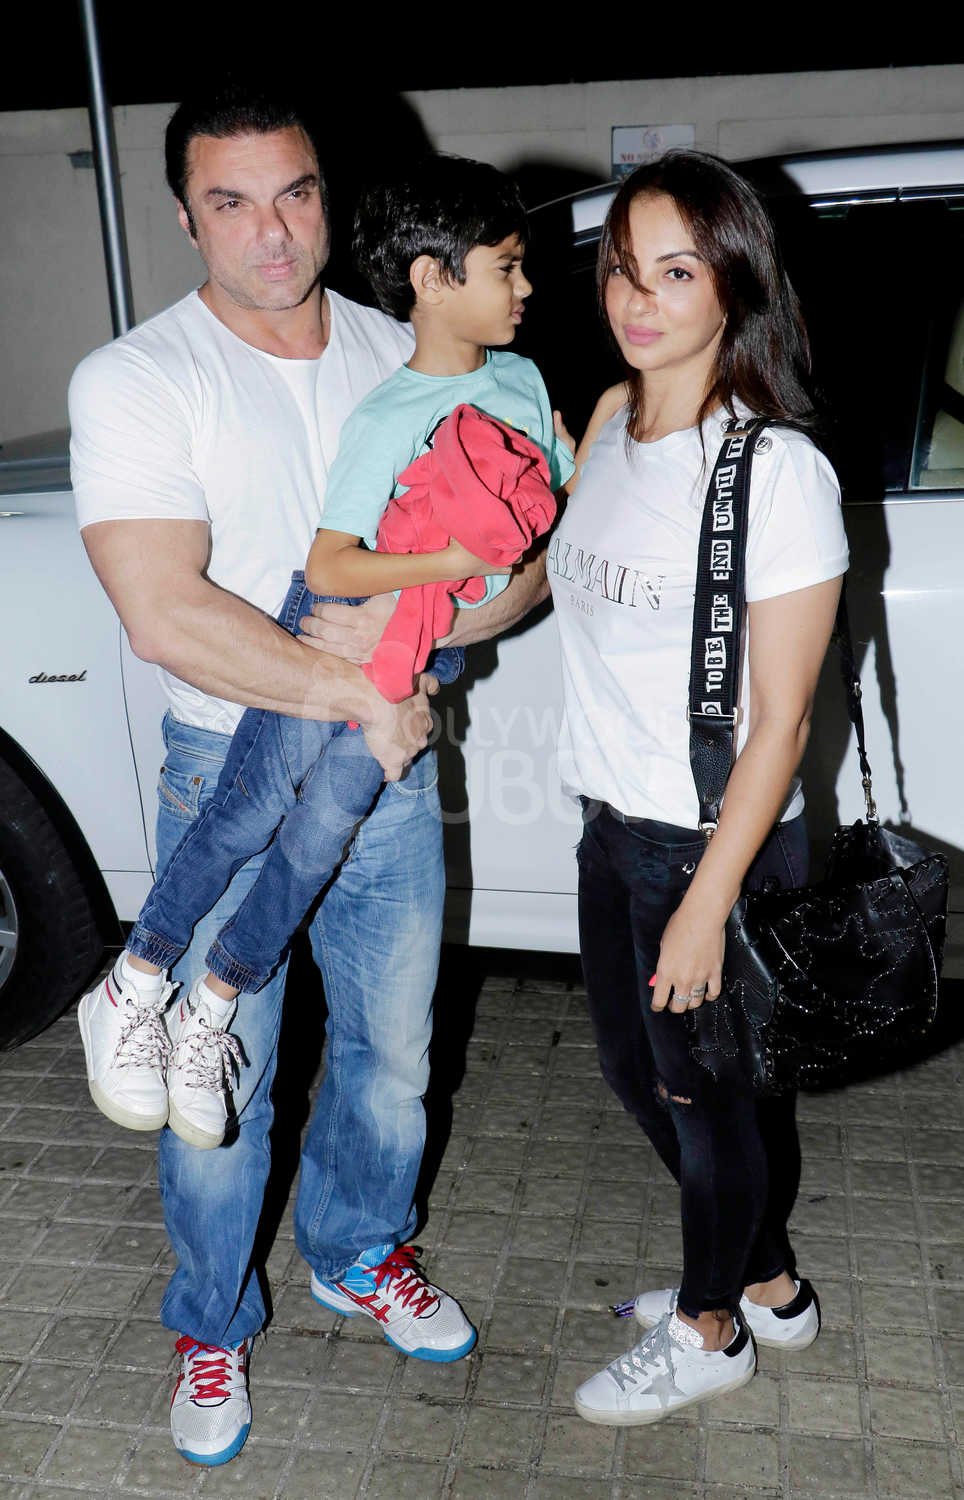 Sohail Khan was spotted along with wife Seema and his younger son.